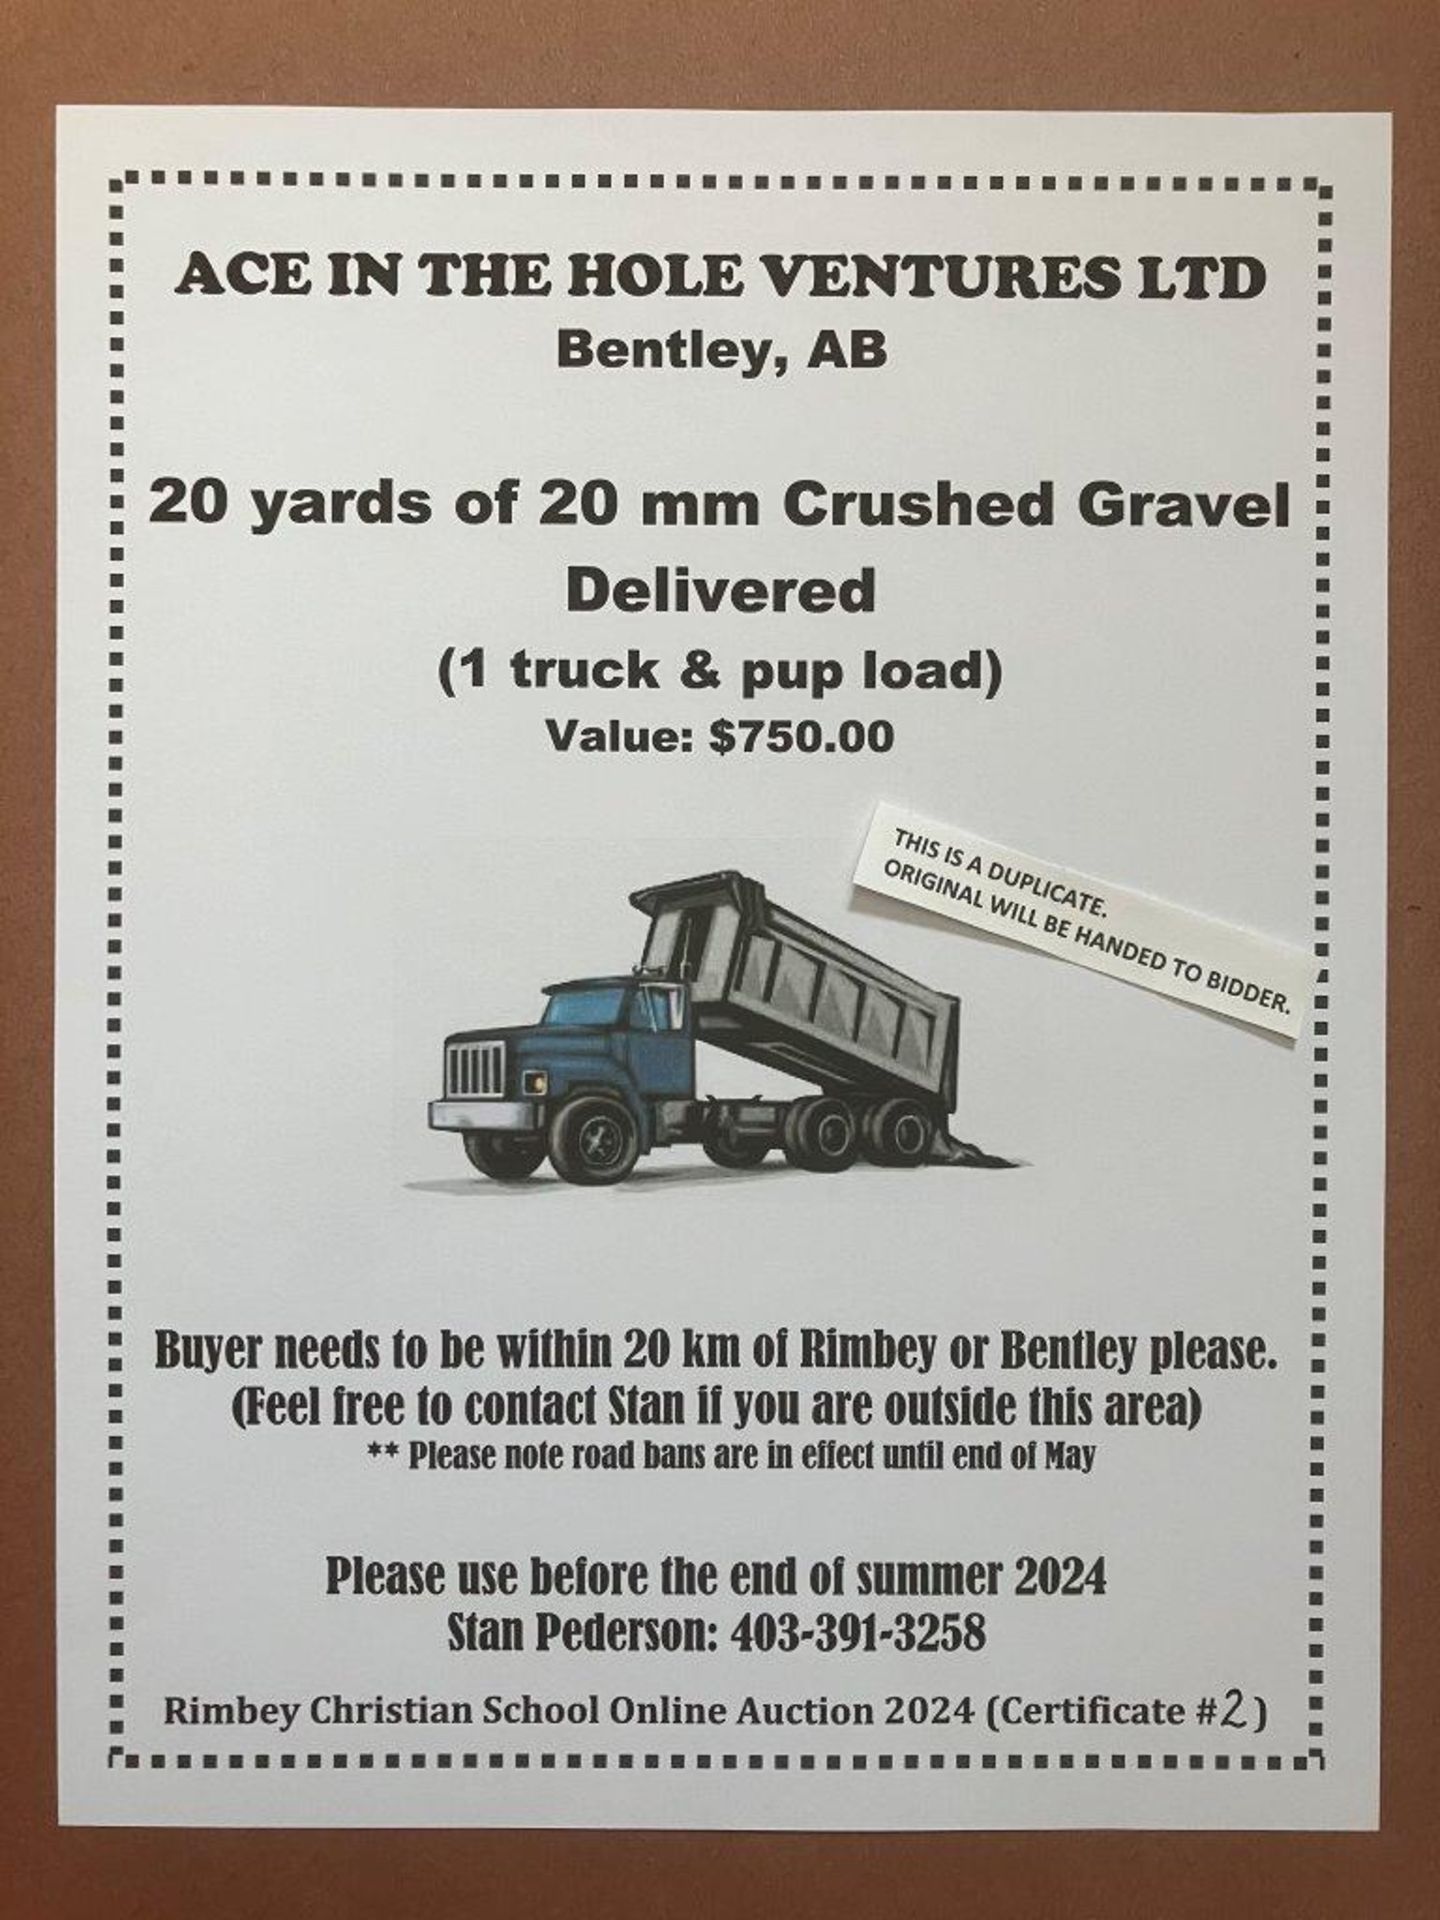 20 YARDS of 20mm CRUSHED GRAVEL - DELIVERED (1 Truck & Pup)